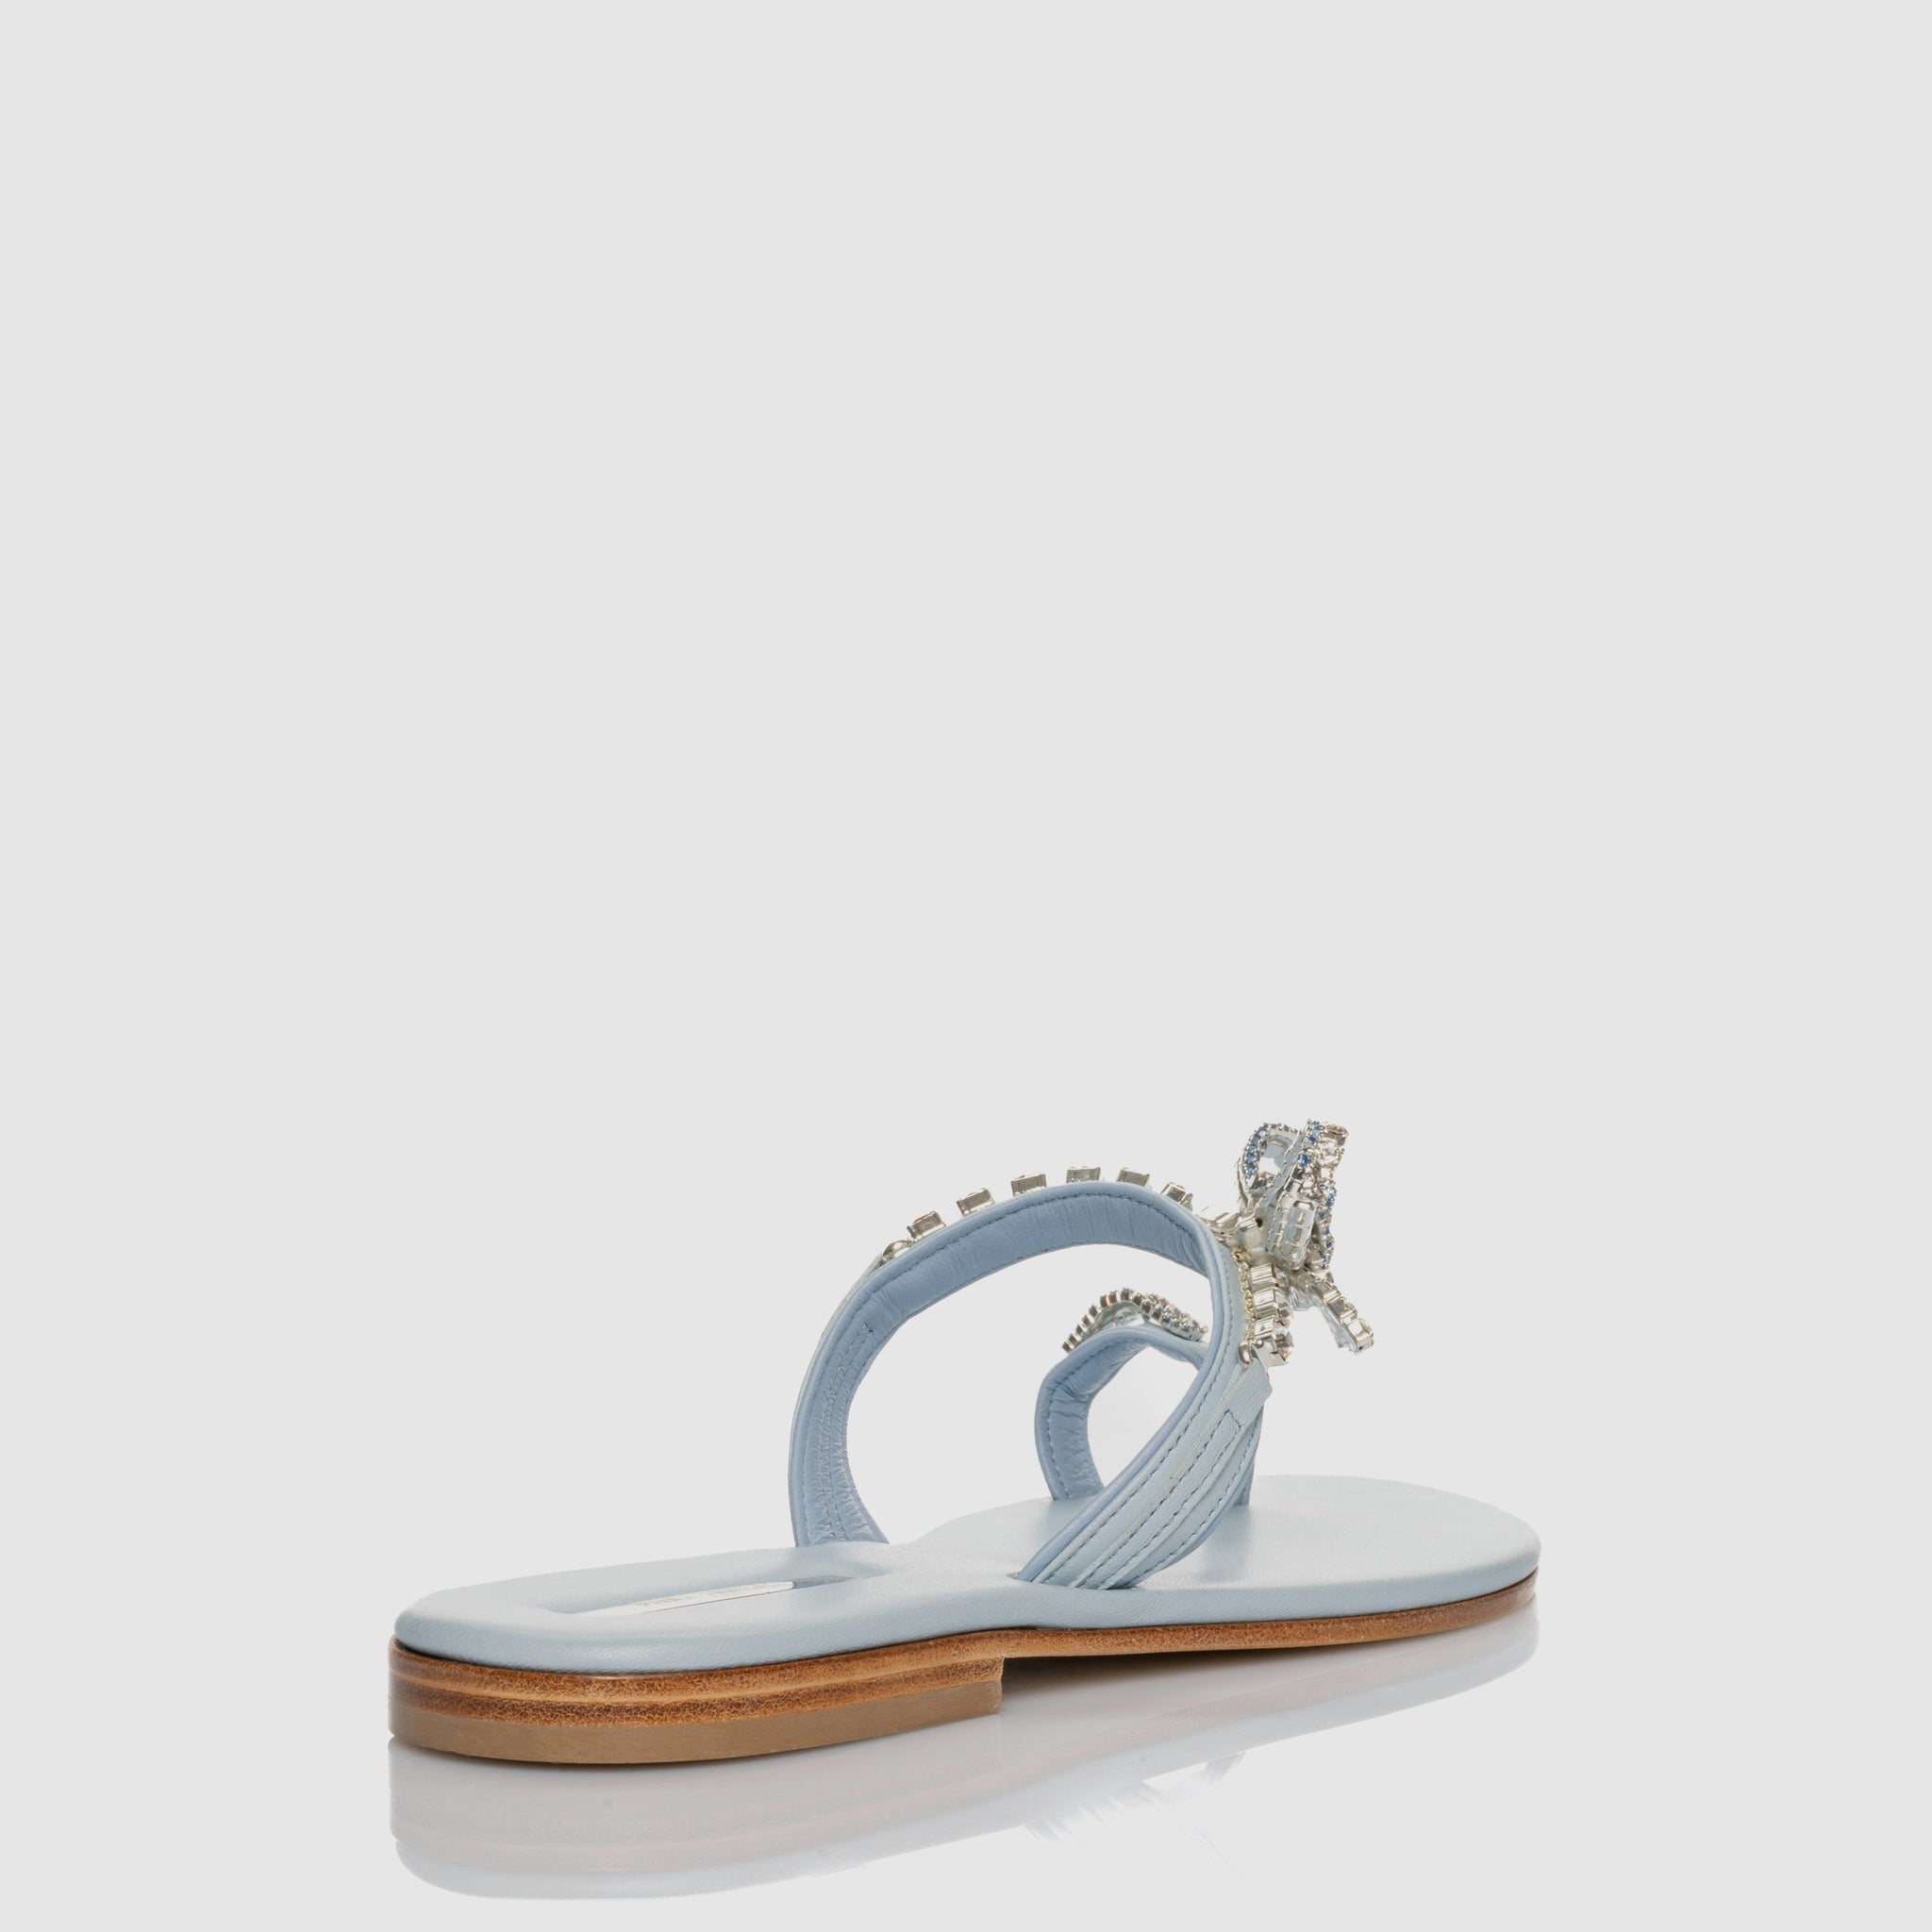 Bright Bow Light Blue sandal in Nappa leather with bow-themed crystals